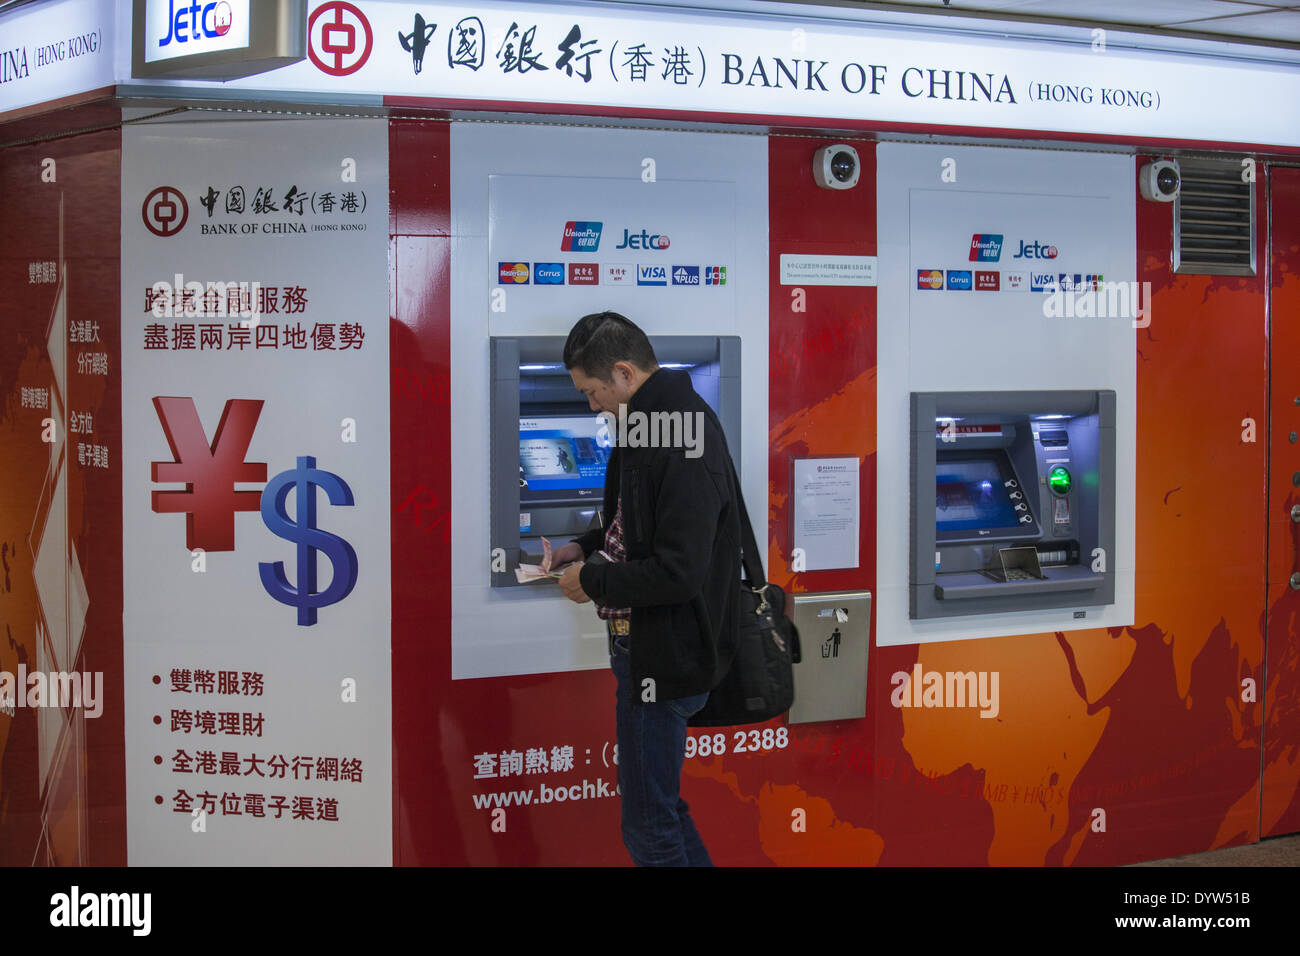 Atm Bank Of China High Resolution Stock Photography and Images - Alamy